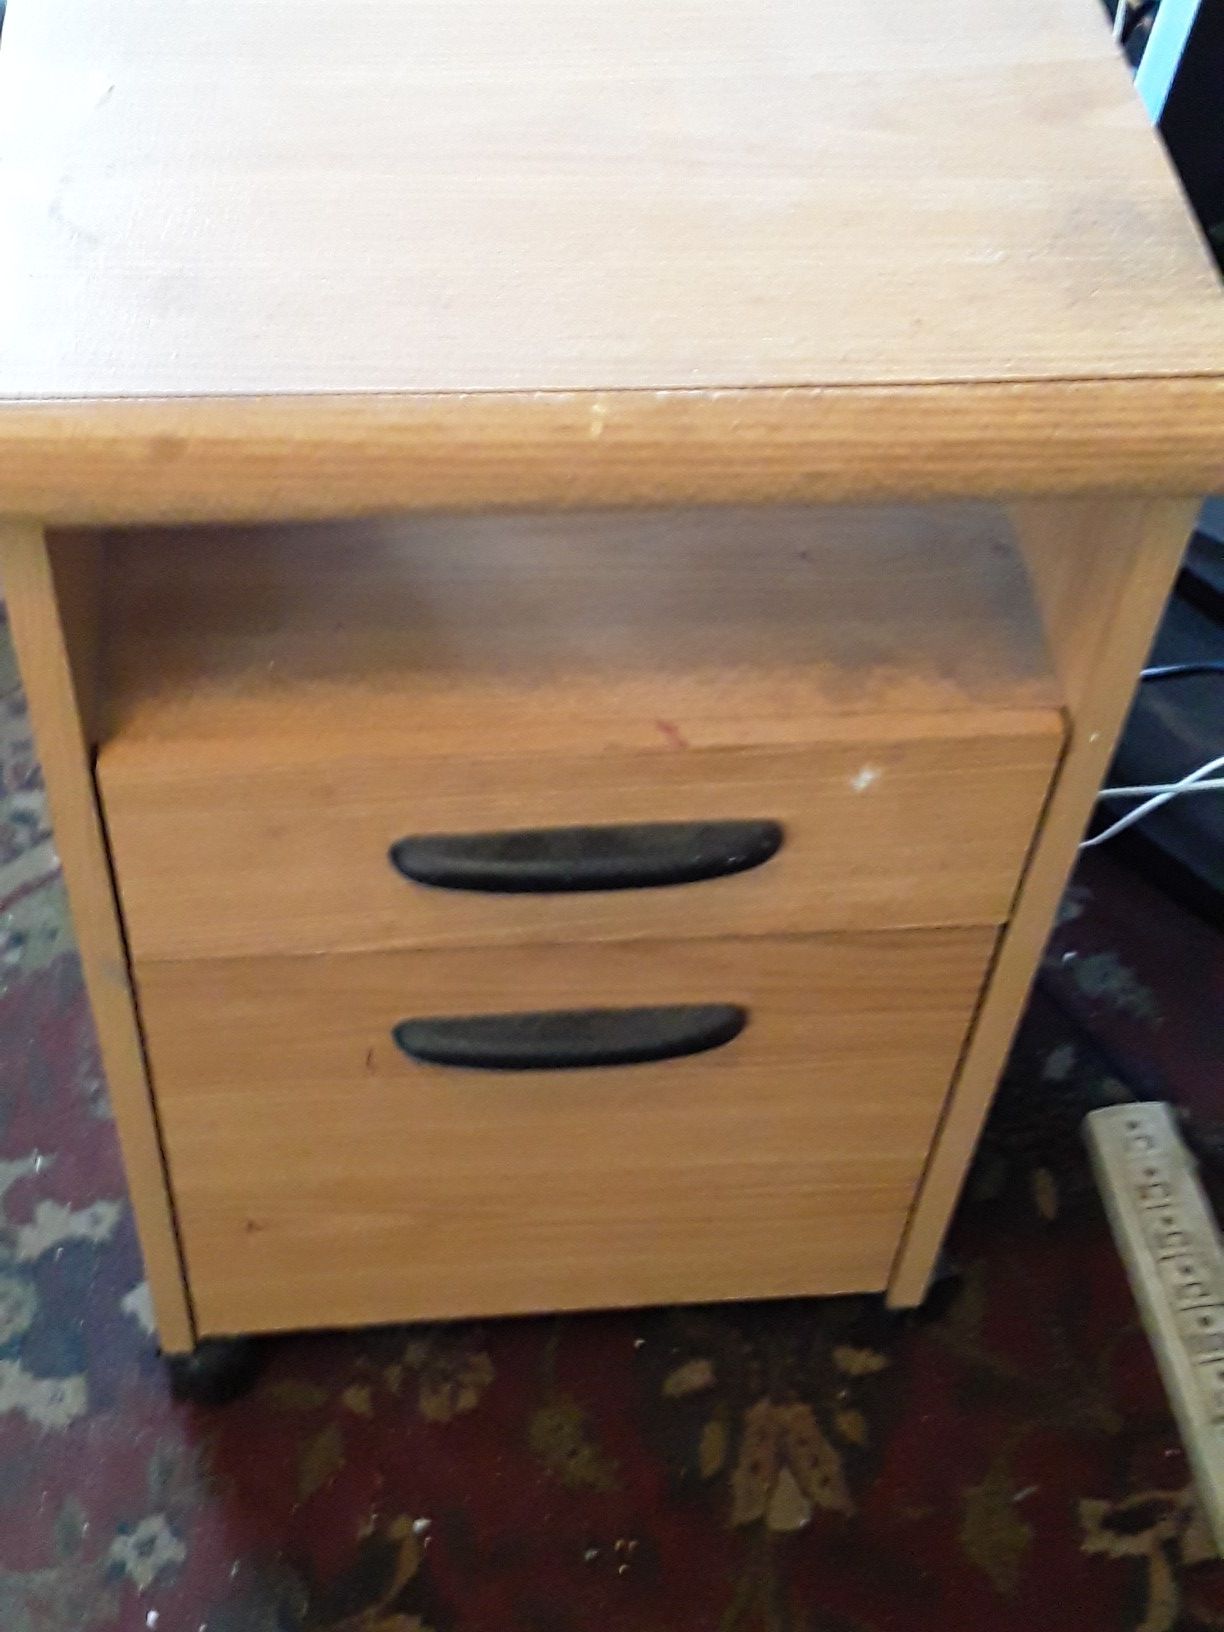 Small filing cabinet on wheels